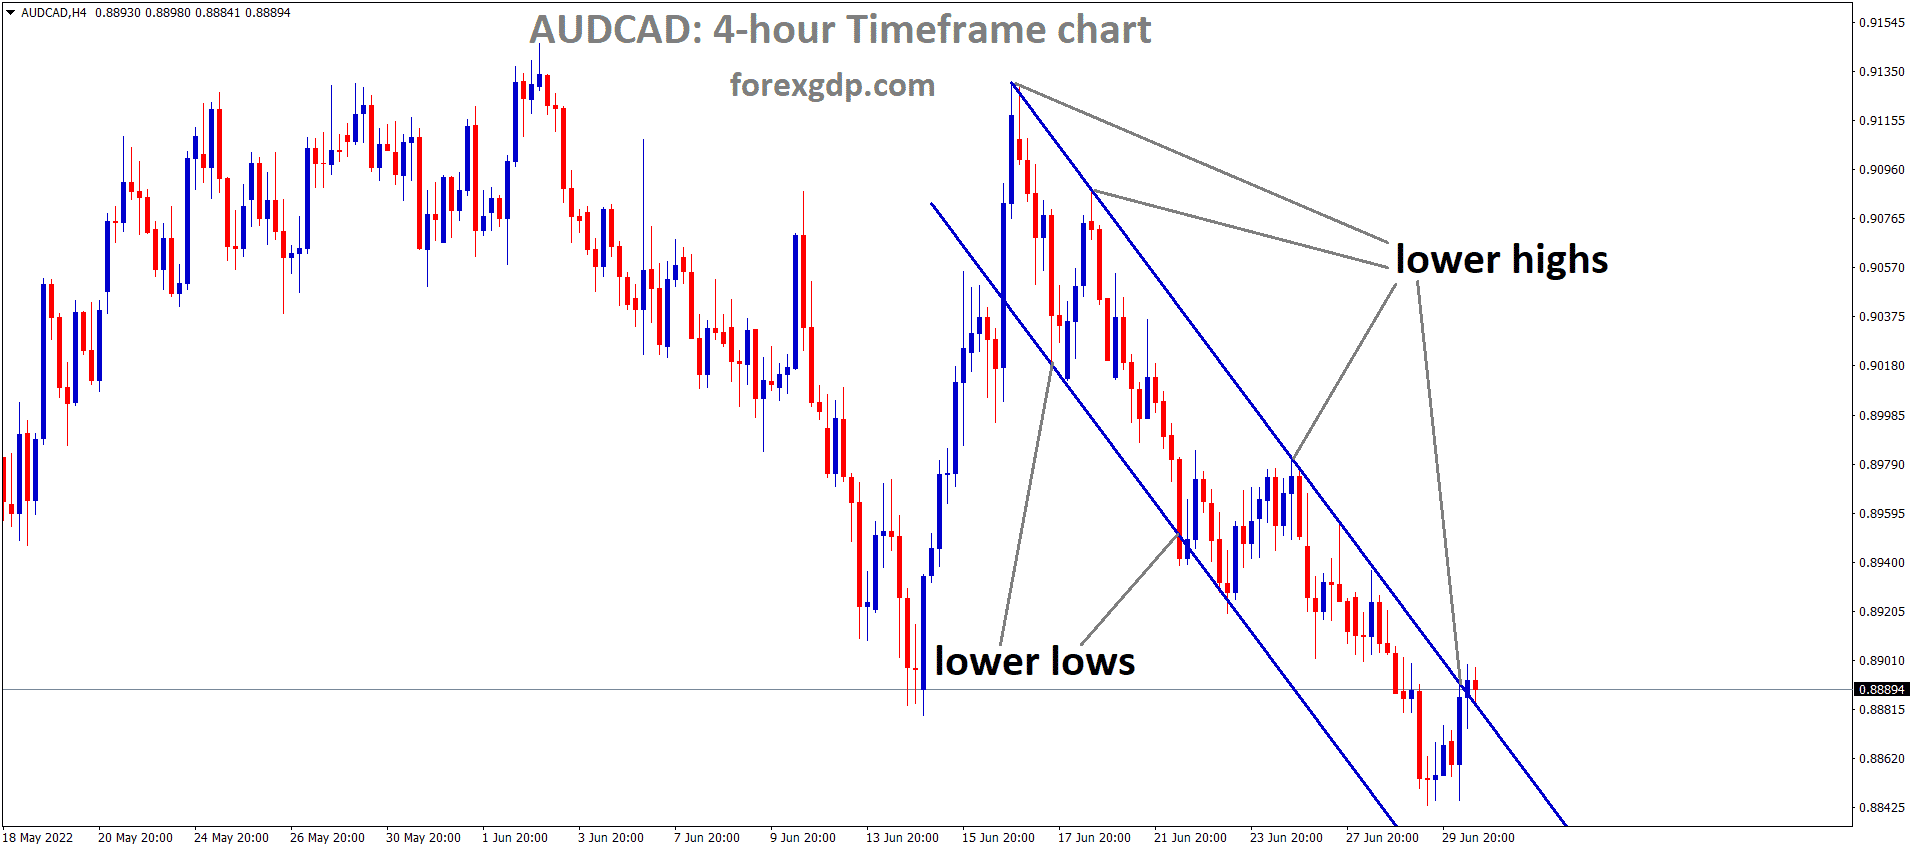 AUDCAD is moving in the Descending channel and the Market has reached the Lower high area of the channel